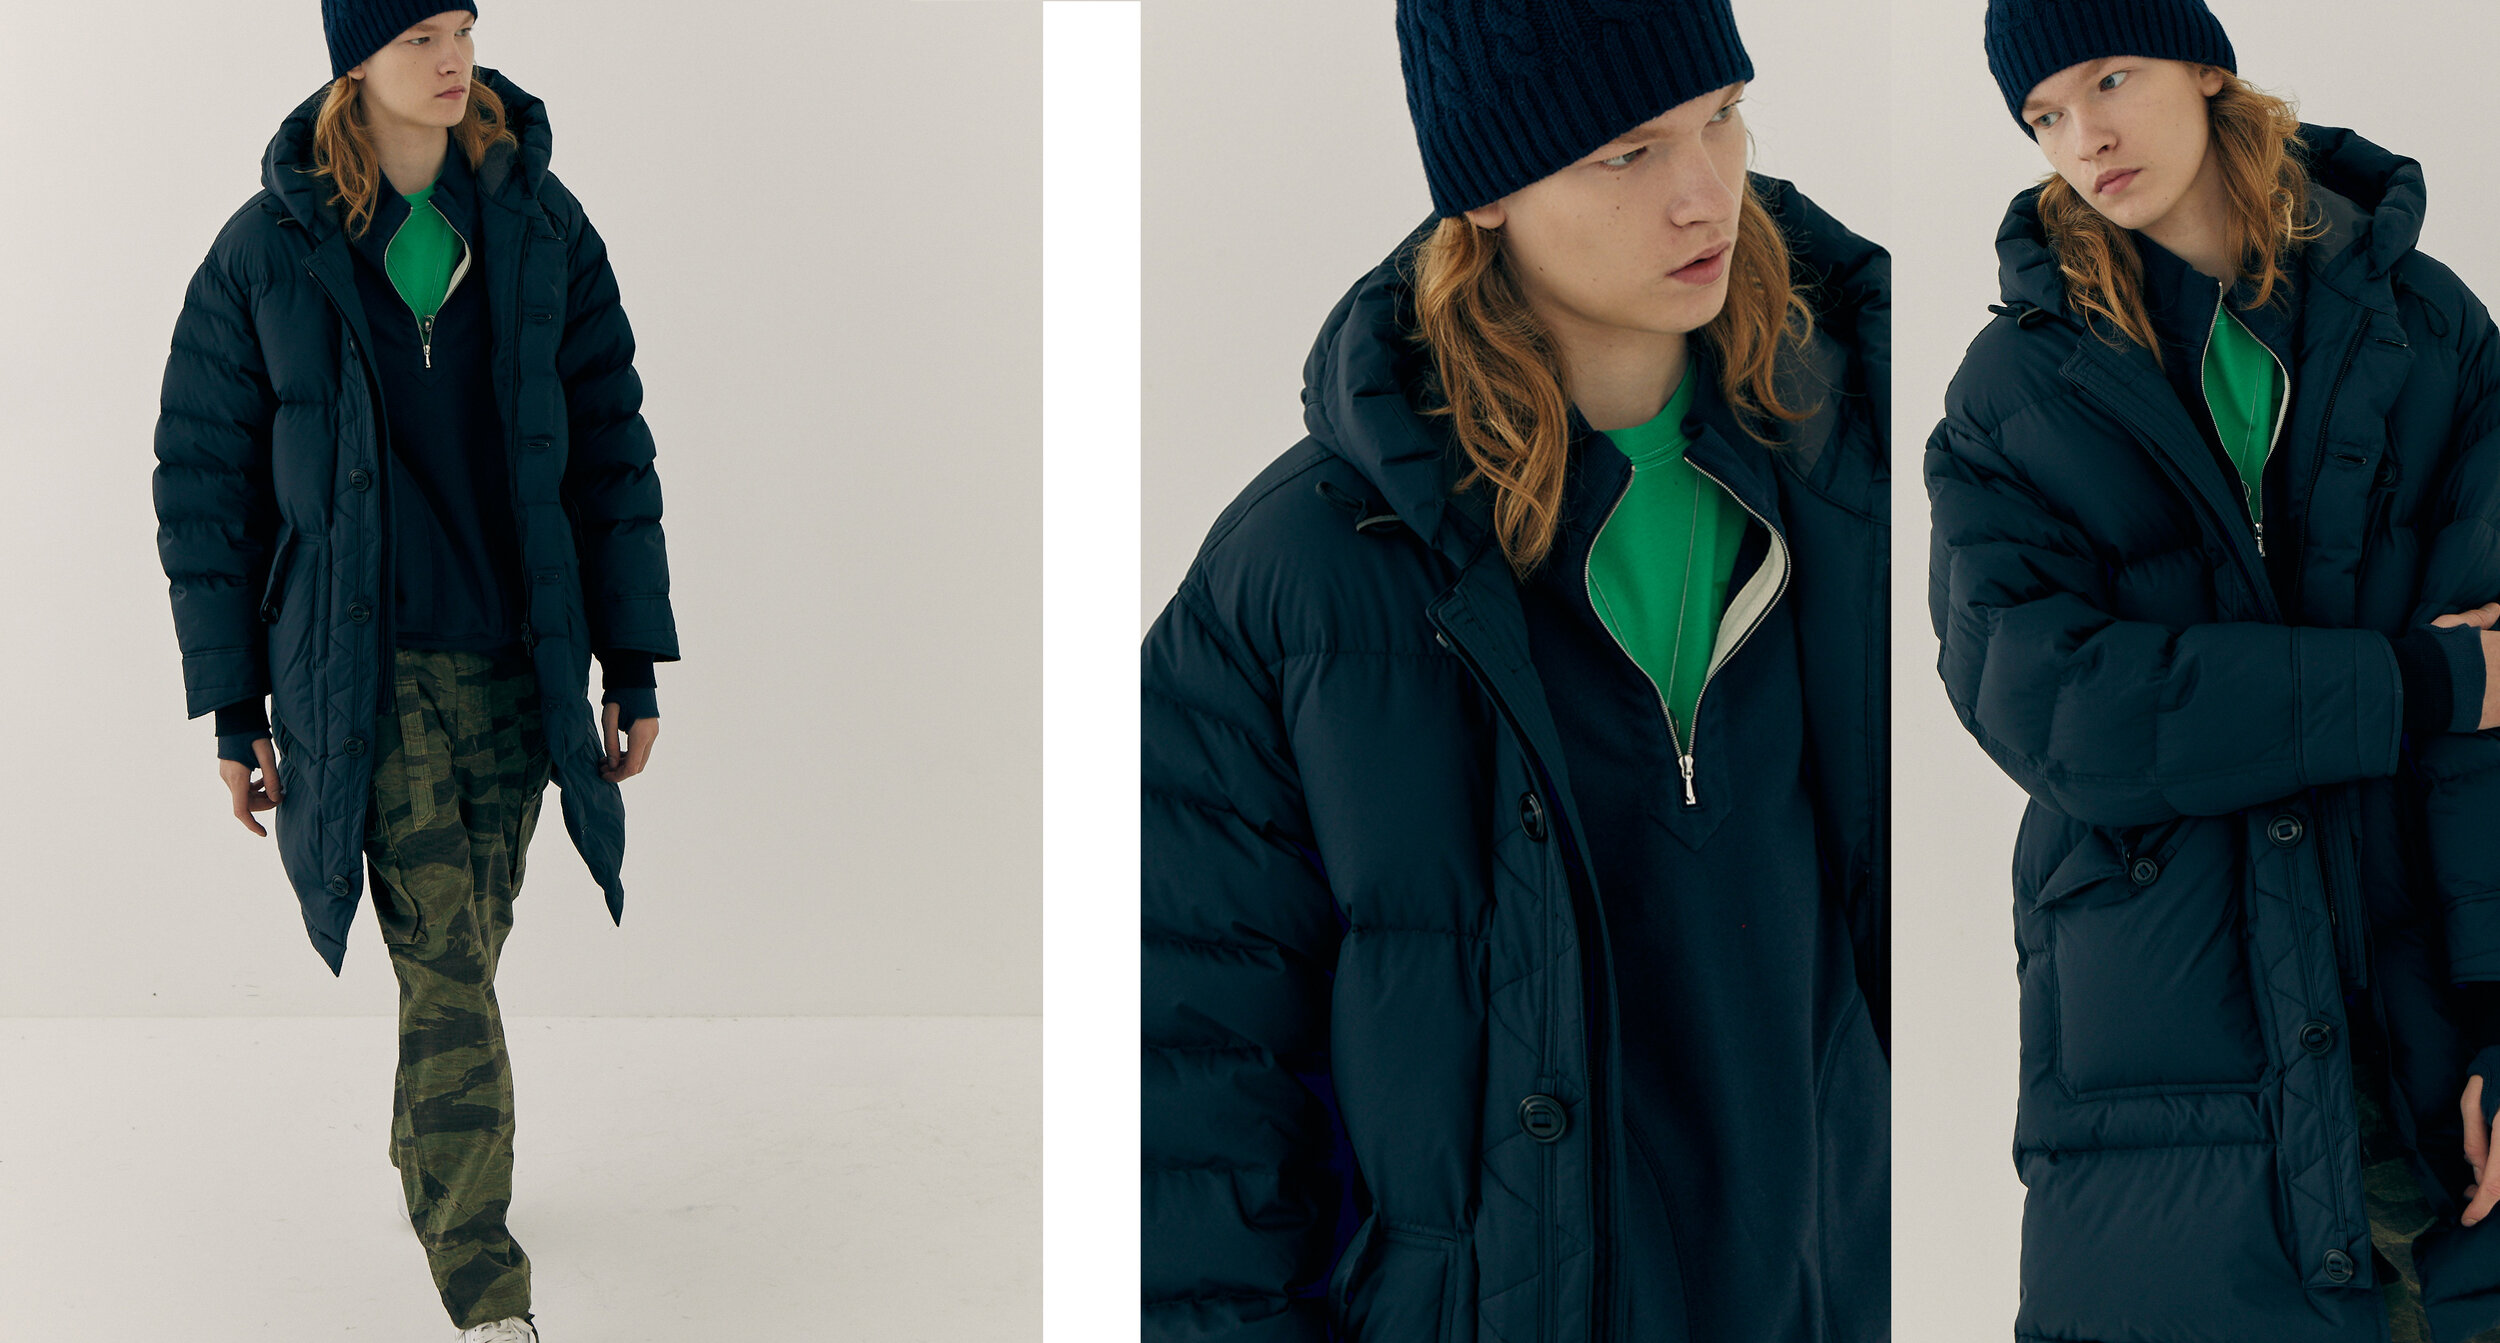 EASTLOGUE Braces for the Cold in Their “Winter Blooming” Editorial — eye_C